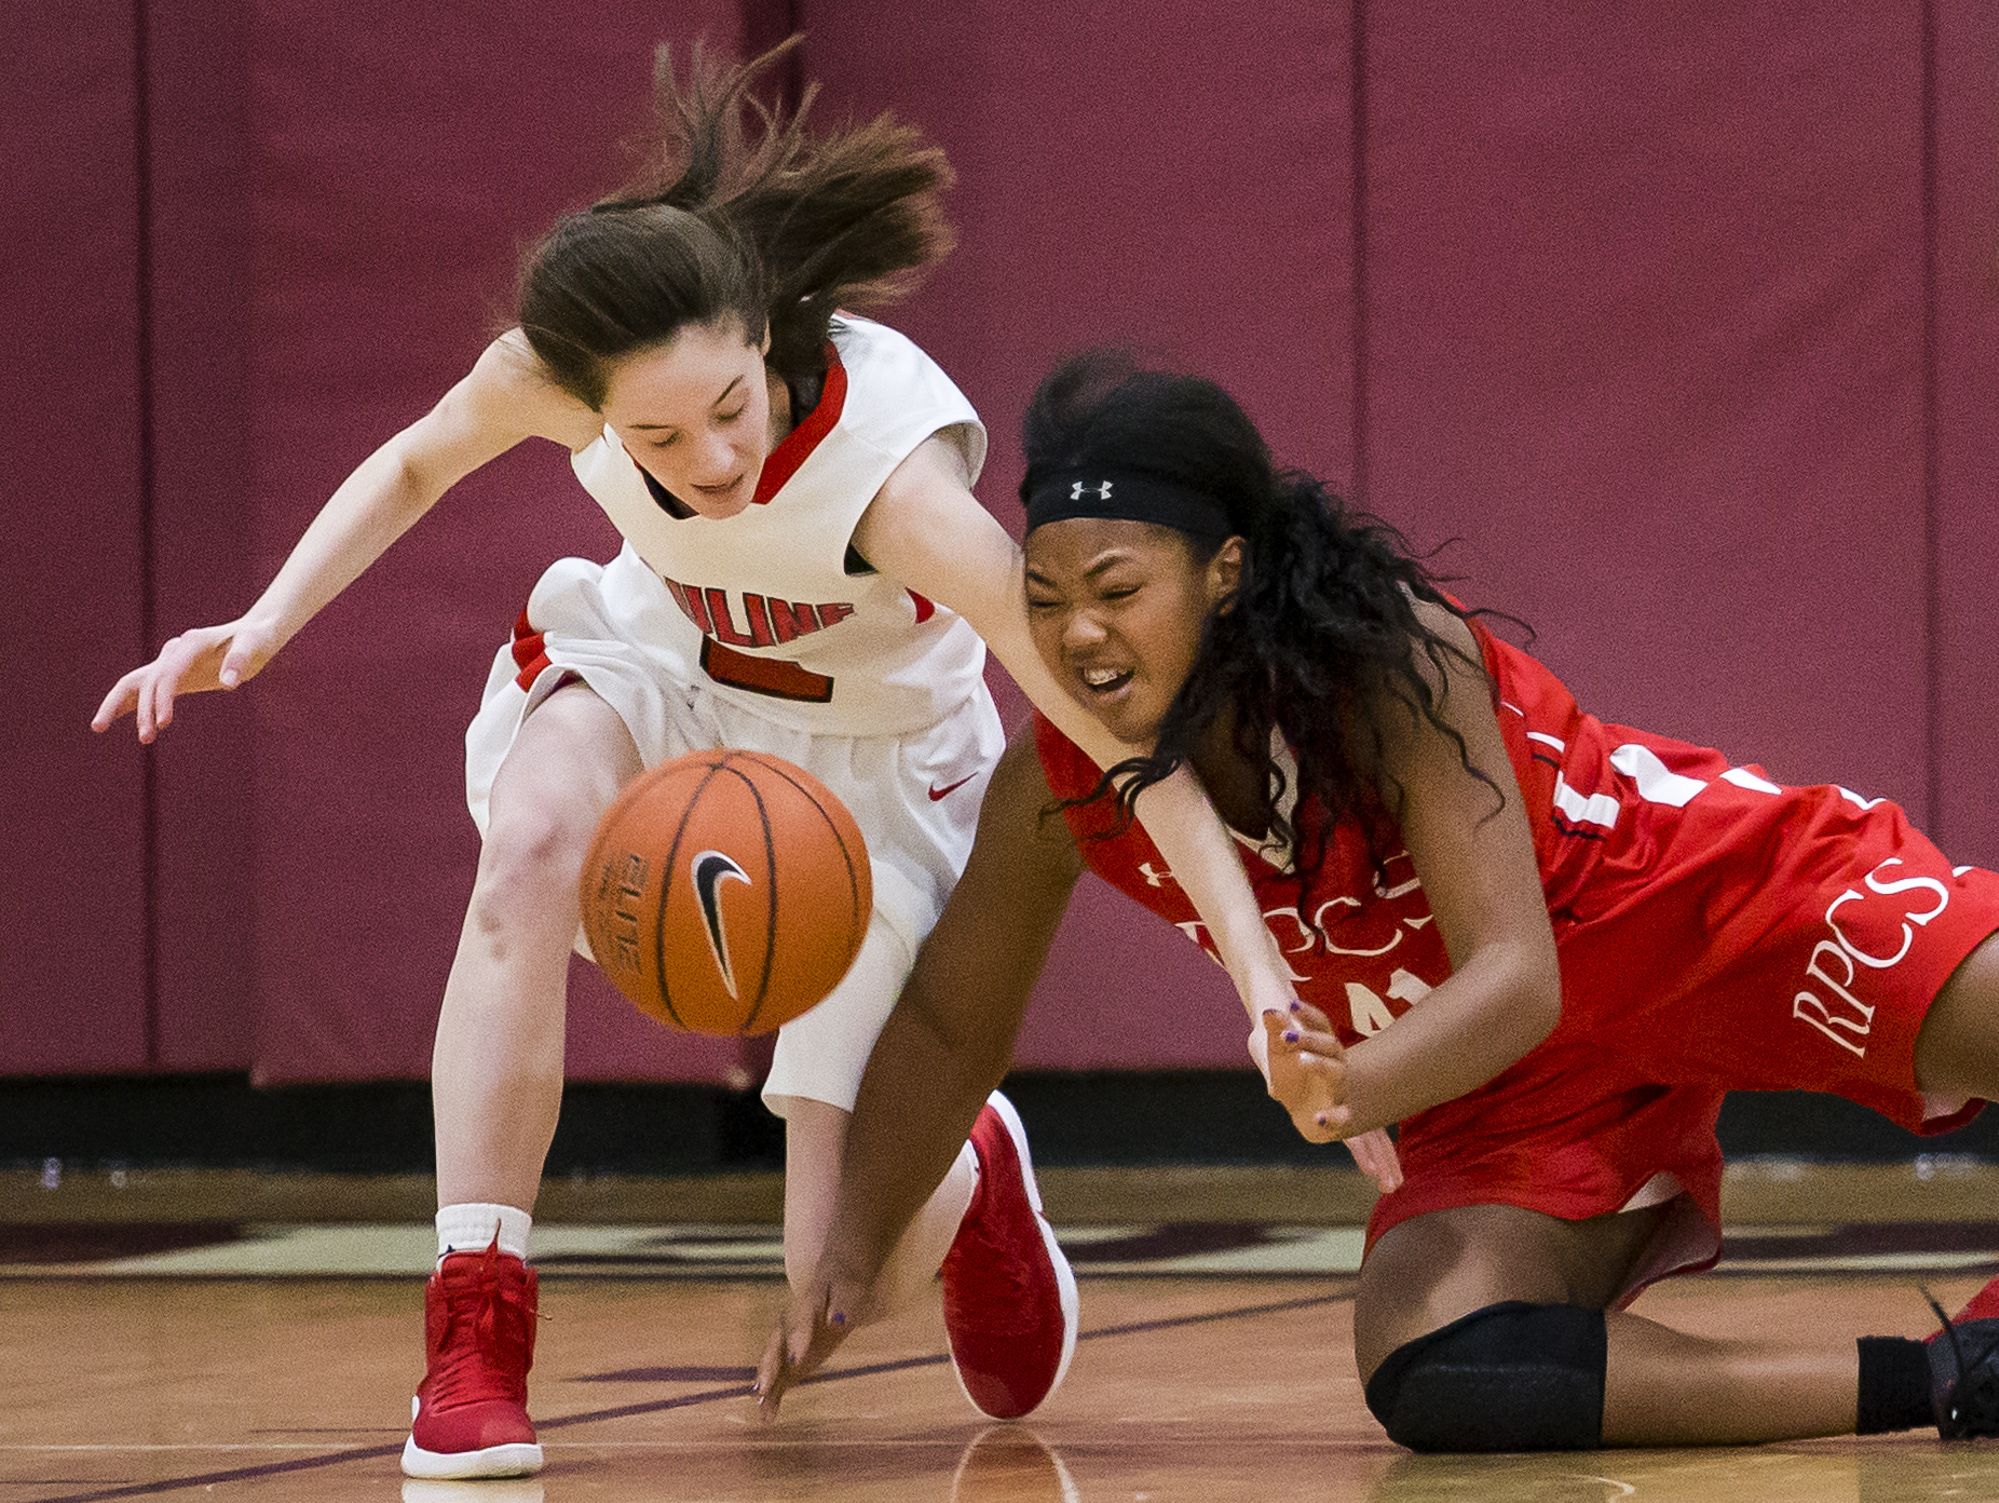 Ursuline's Maggie Connolly (left) fights for a loose ball with Roland Park's Christyn Robinson (right) in the first half of Ursuline Academy's 47-40 win over Roland Park Country School in the Diamond State Classic at St. Elizabeth High School in Wilmington on Friday evening.